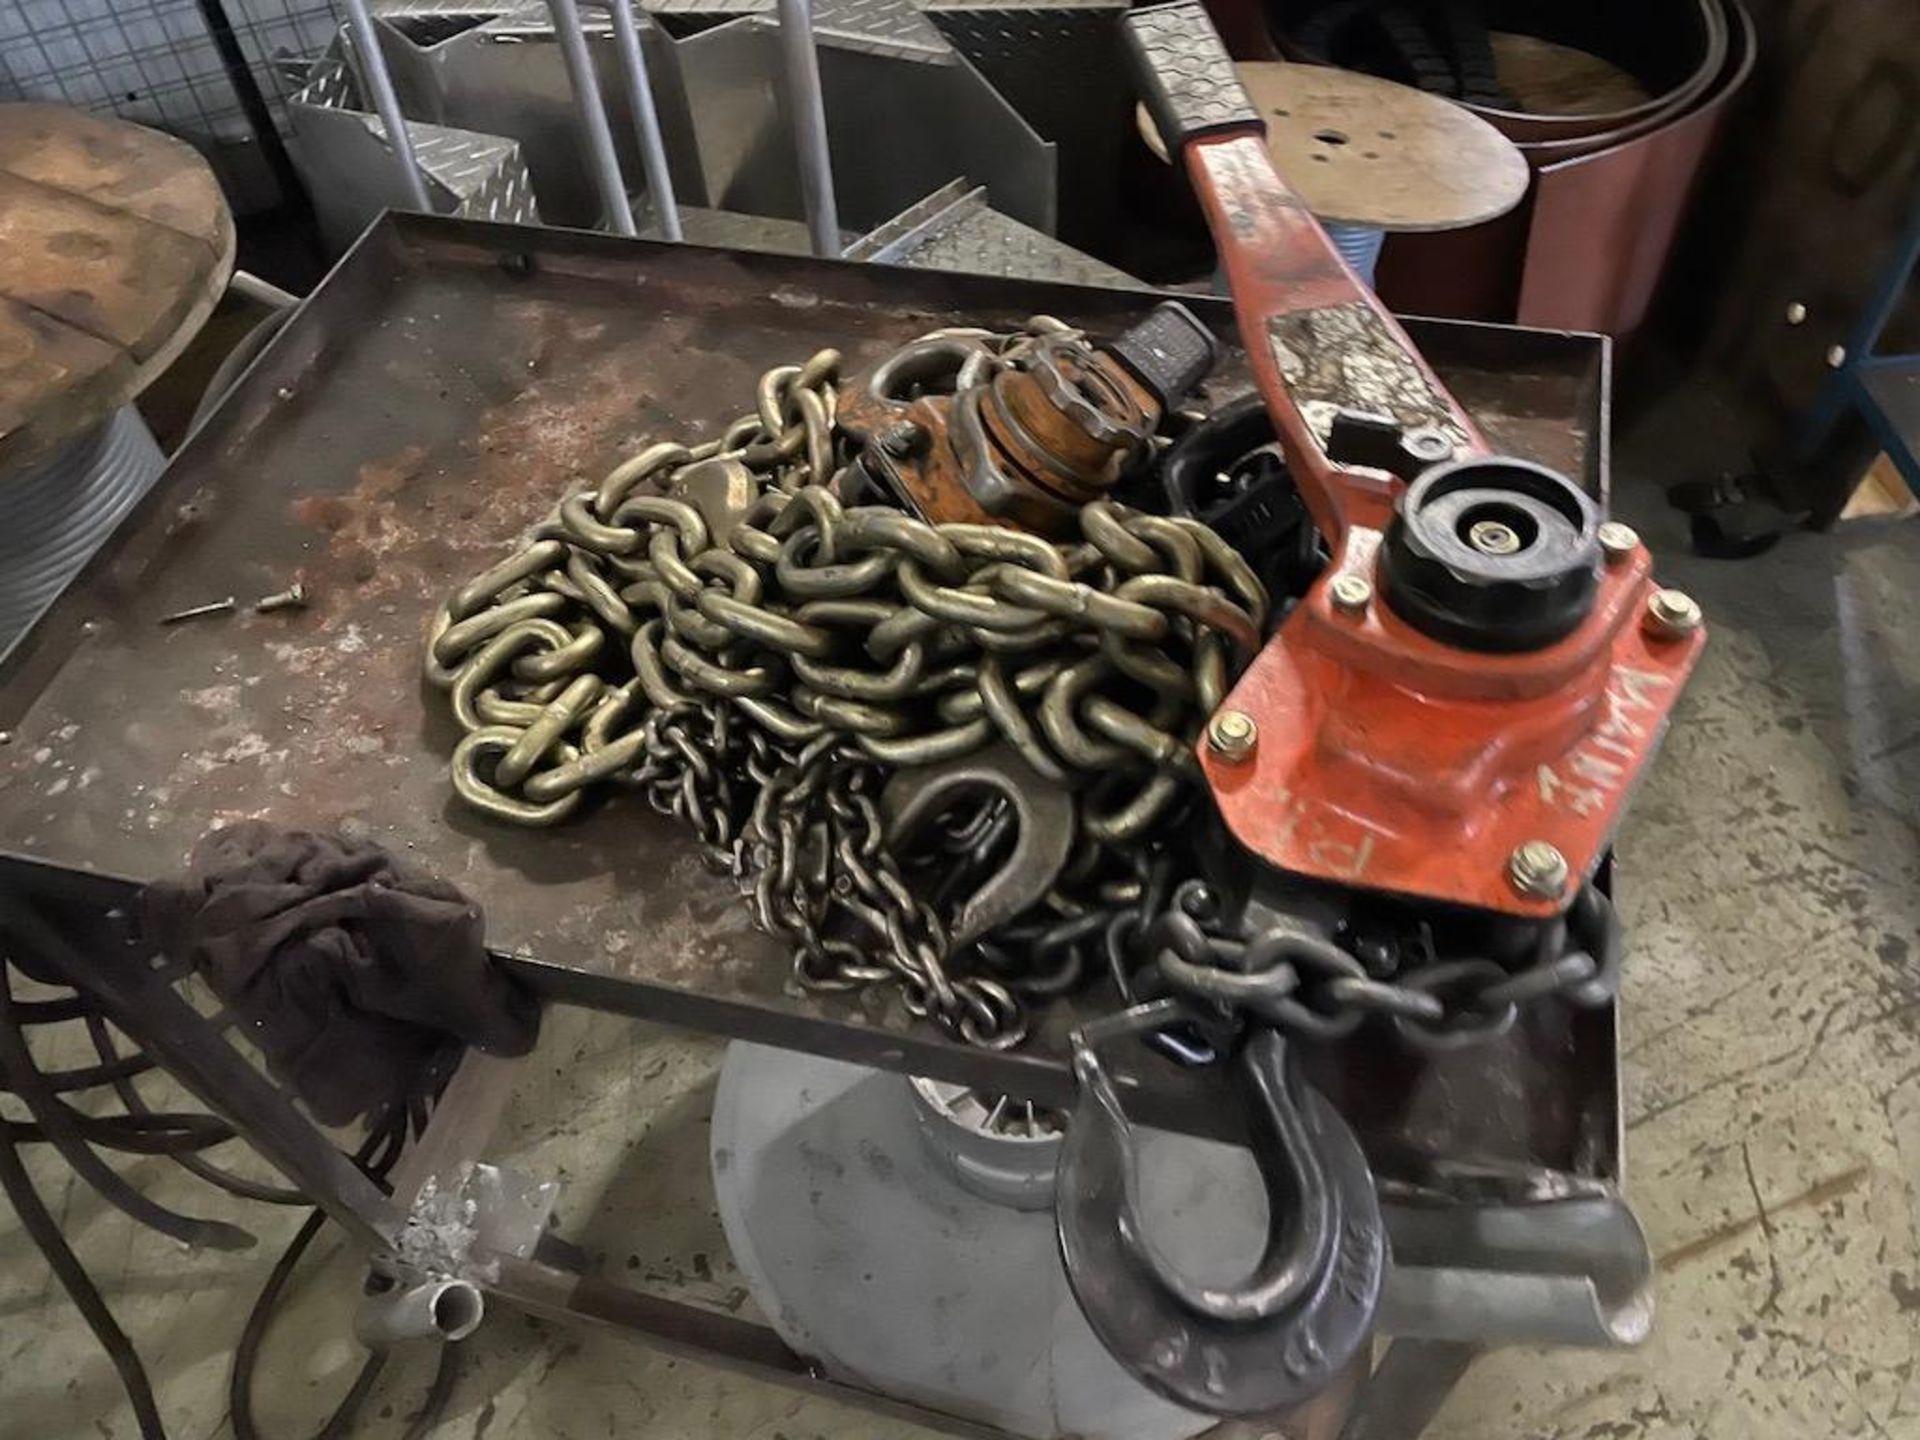 LOT REMAINING CONTENTS OF MAINTENANCE CAGE, MAG DRILL, 2 PORTABLE CARTS W JACKS, TOOLS, CONTENTS, - Image 2 of 16